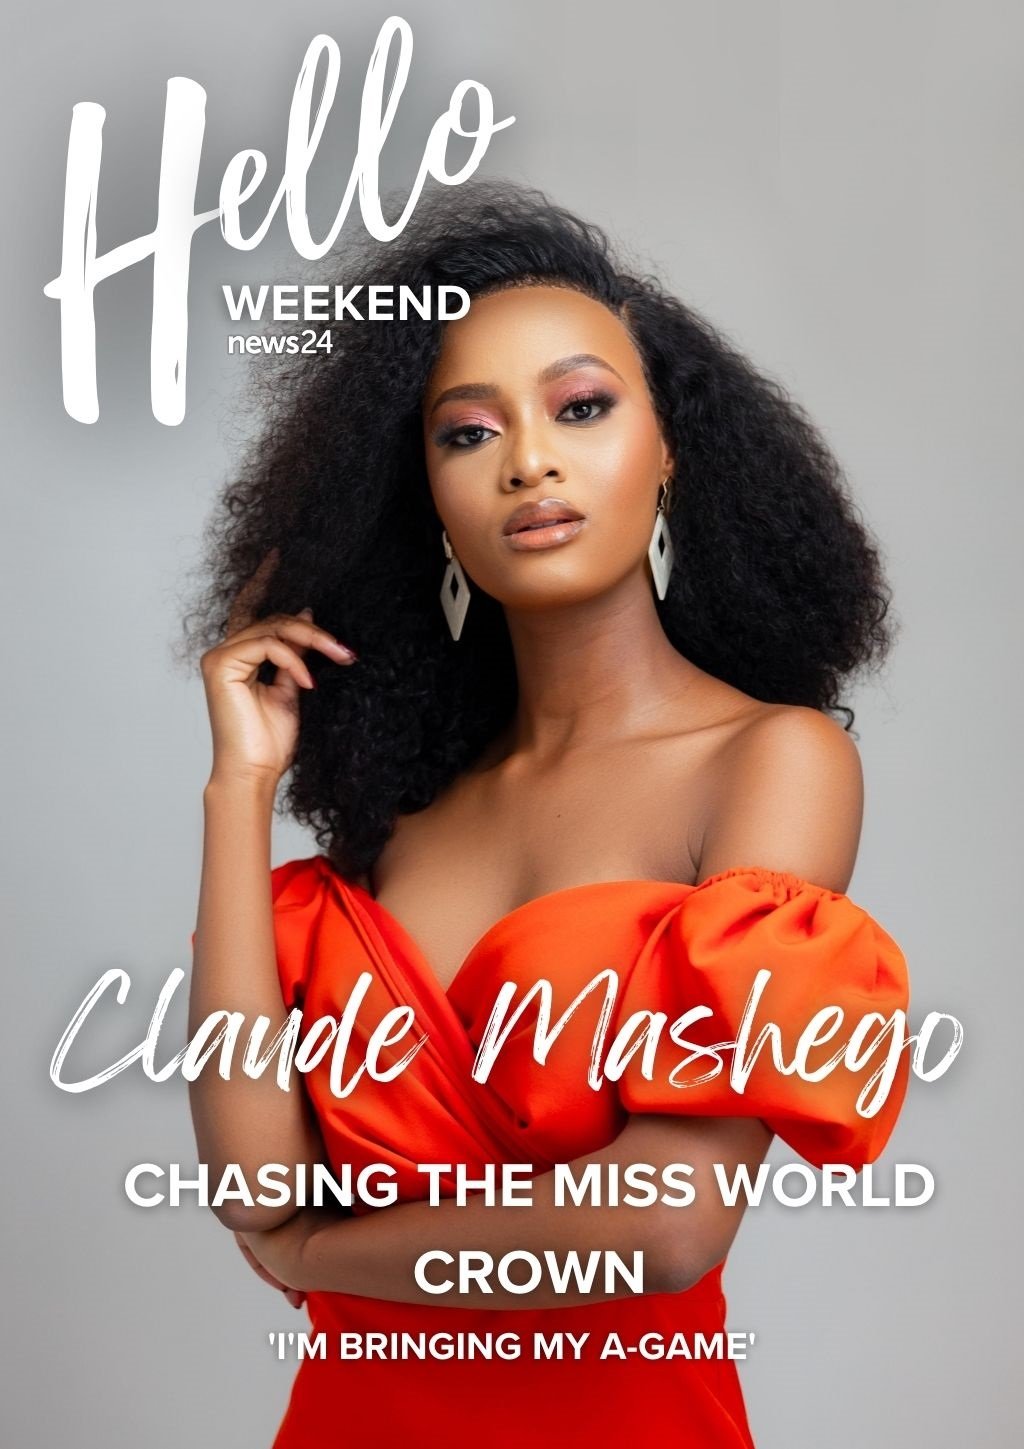 News24 | HELLO WEEKEND | Claude Mashego bringing her A-game to the Miss World pageant